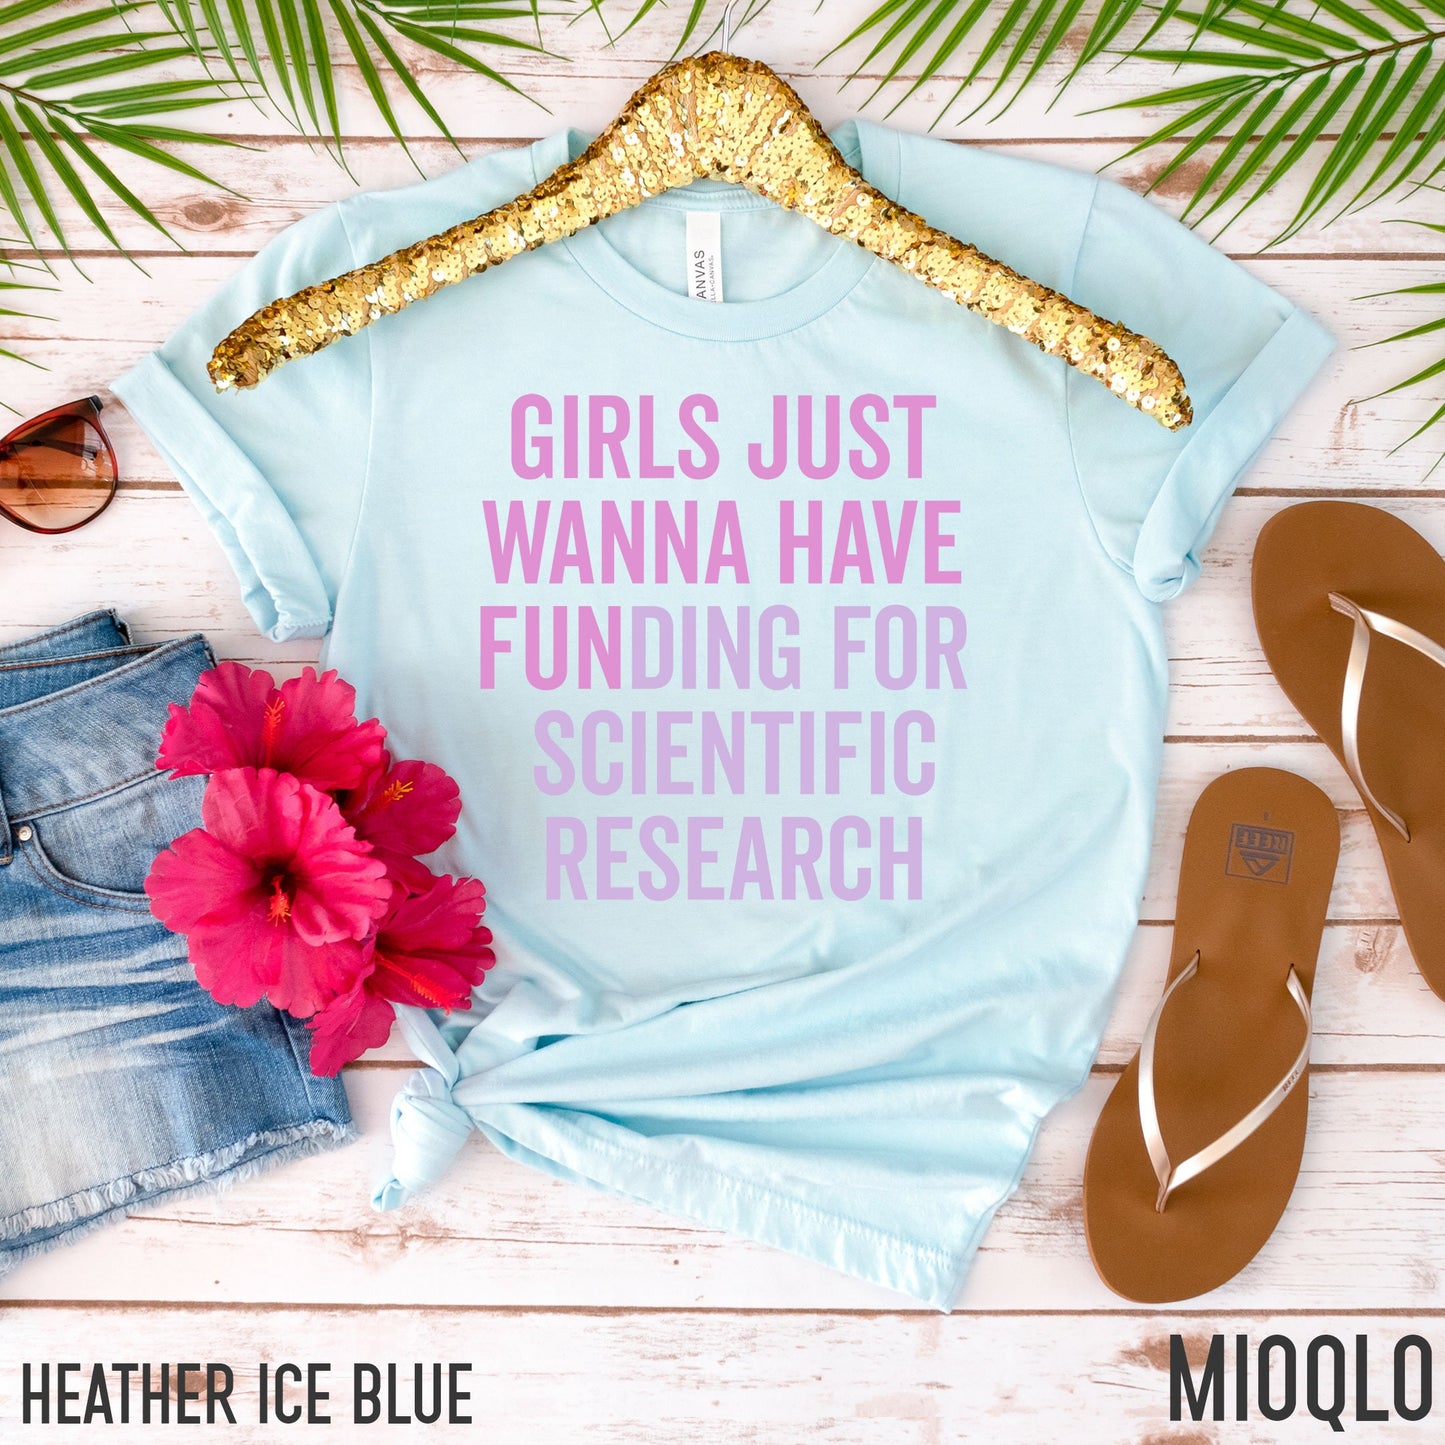 Girls Just Wanna Have Funding For Scientific Research, Women Of Science Shirt, Phd Student, STEMinist Grad, Doctorate Graduate Degree Gifts